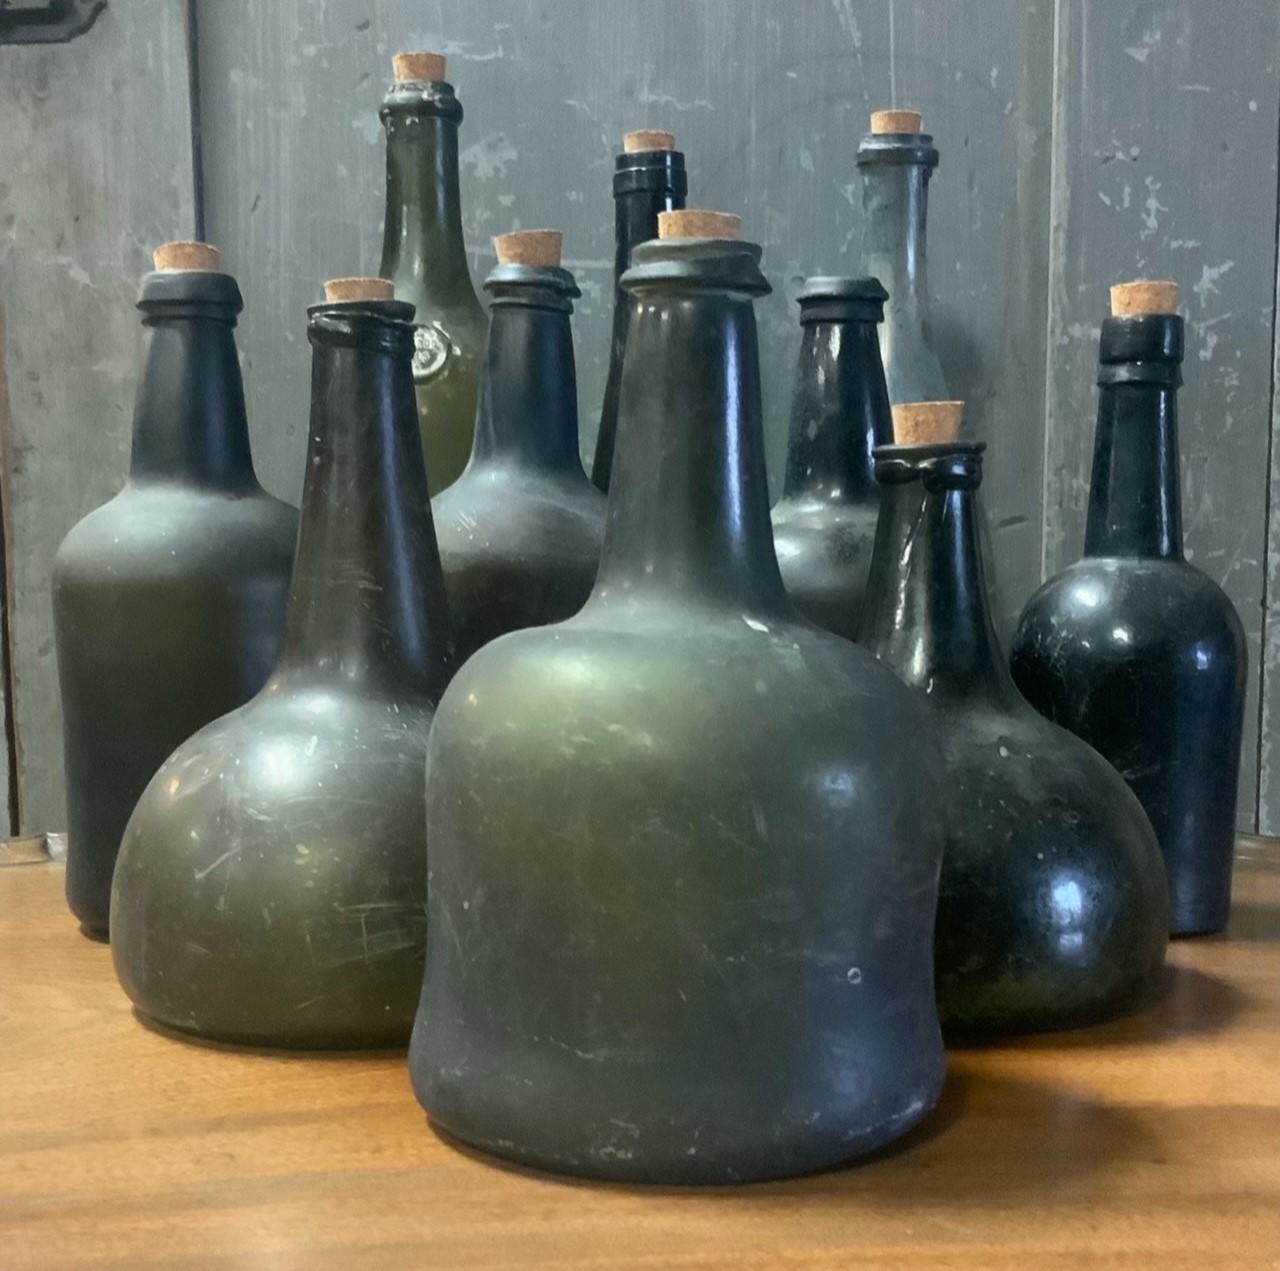 18TH/19TH C. GLASS BOTTLES. Two early